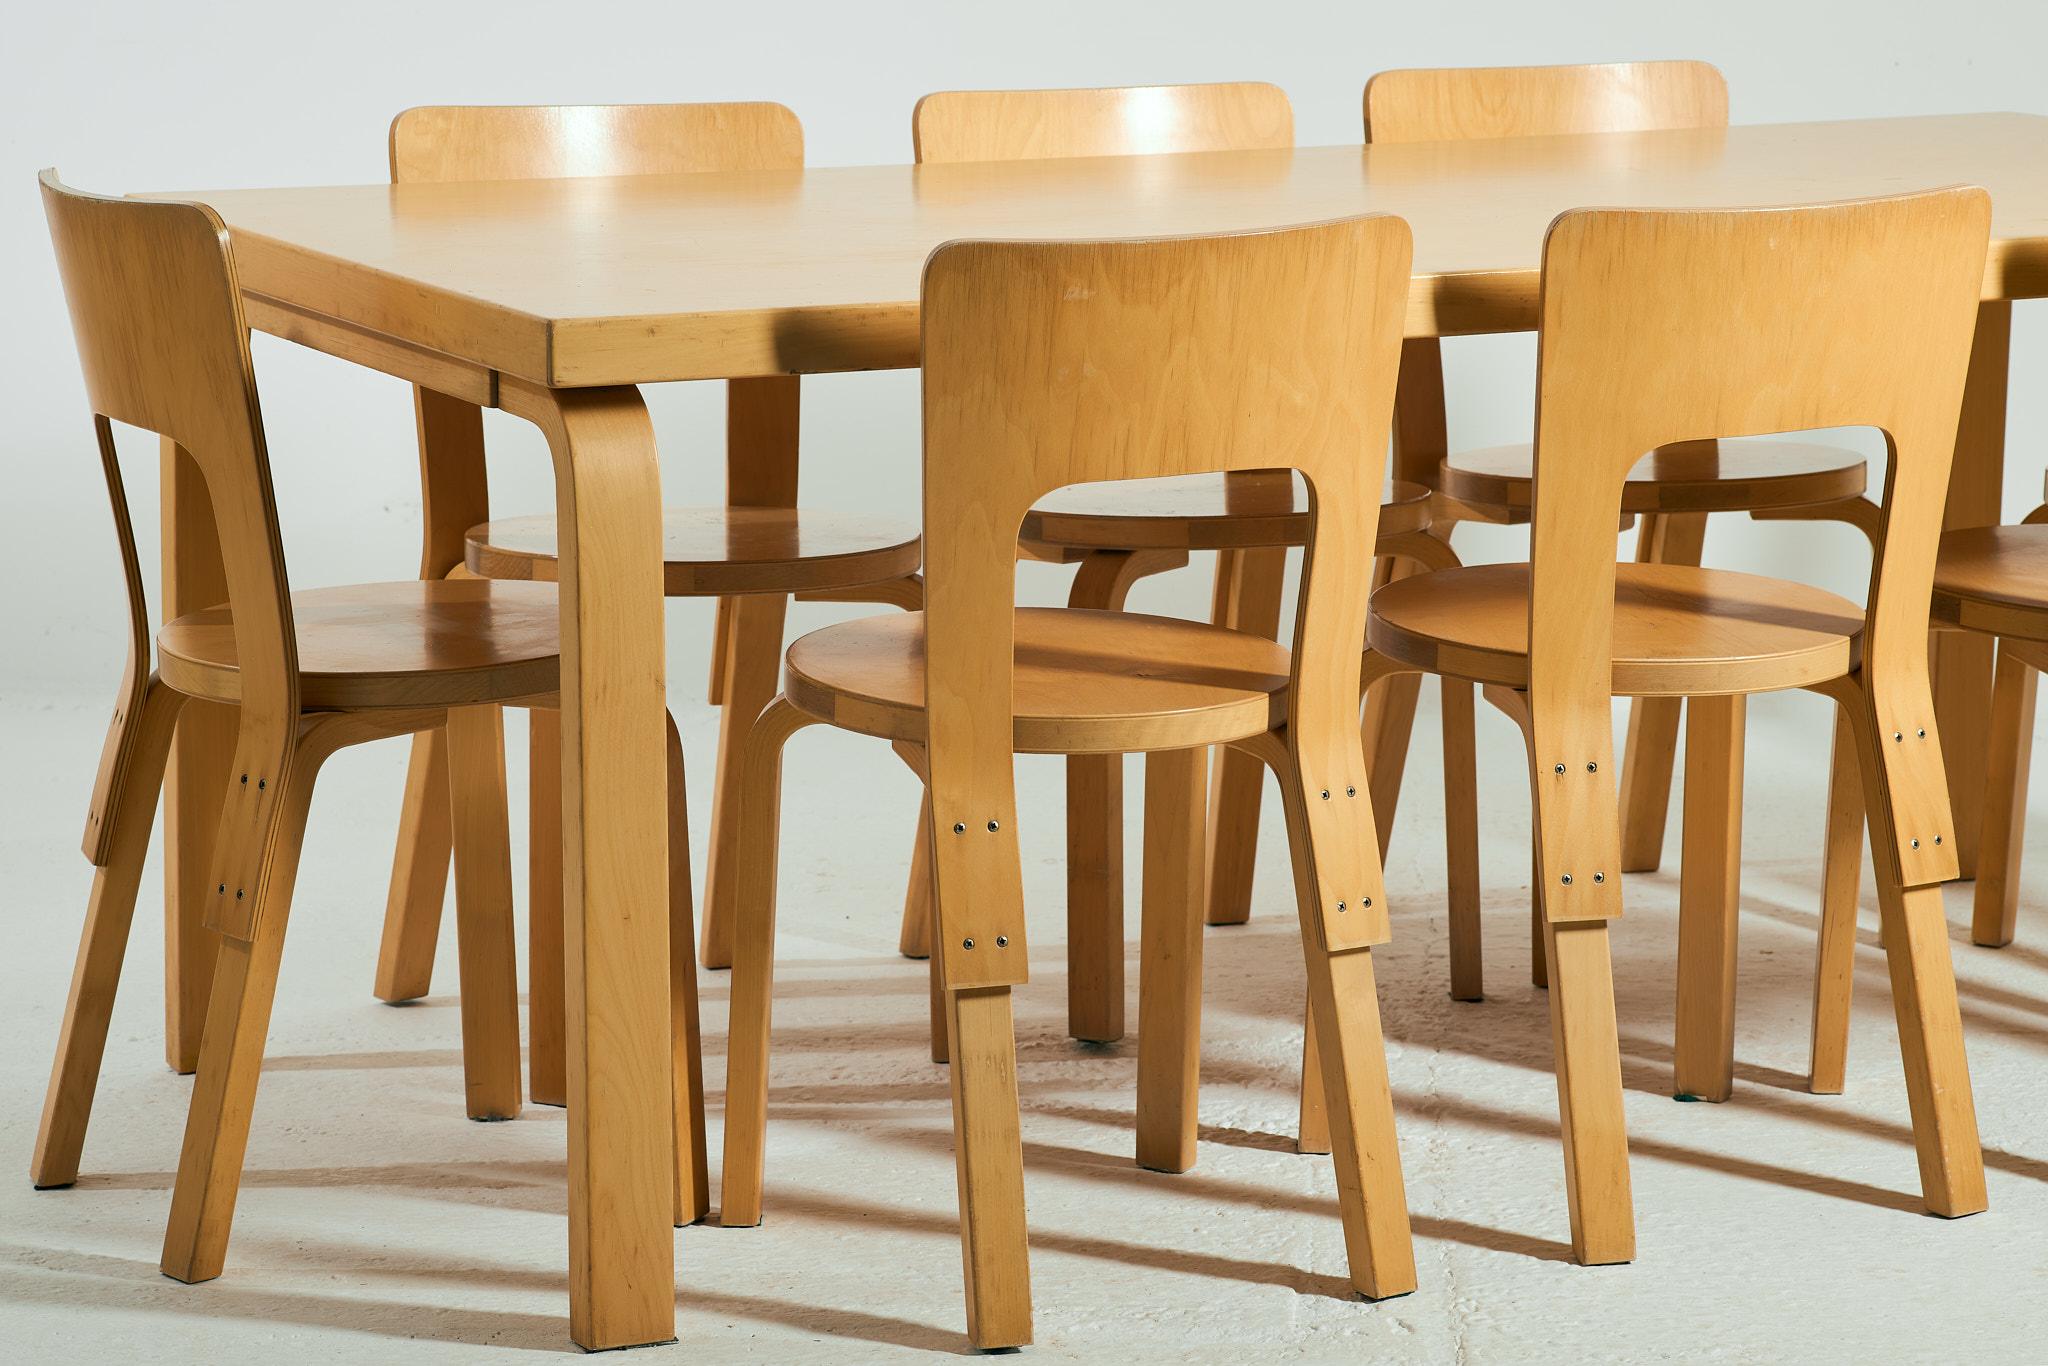 A vintage model 83 dining table by Alvar Aalto for Artek made of Finnish Birch ply & 8 model 66 chairs in the same wood. 

This set is over 20 years old but the exact production date is unclear. There are no stamps or marks related to Artek but the